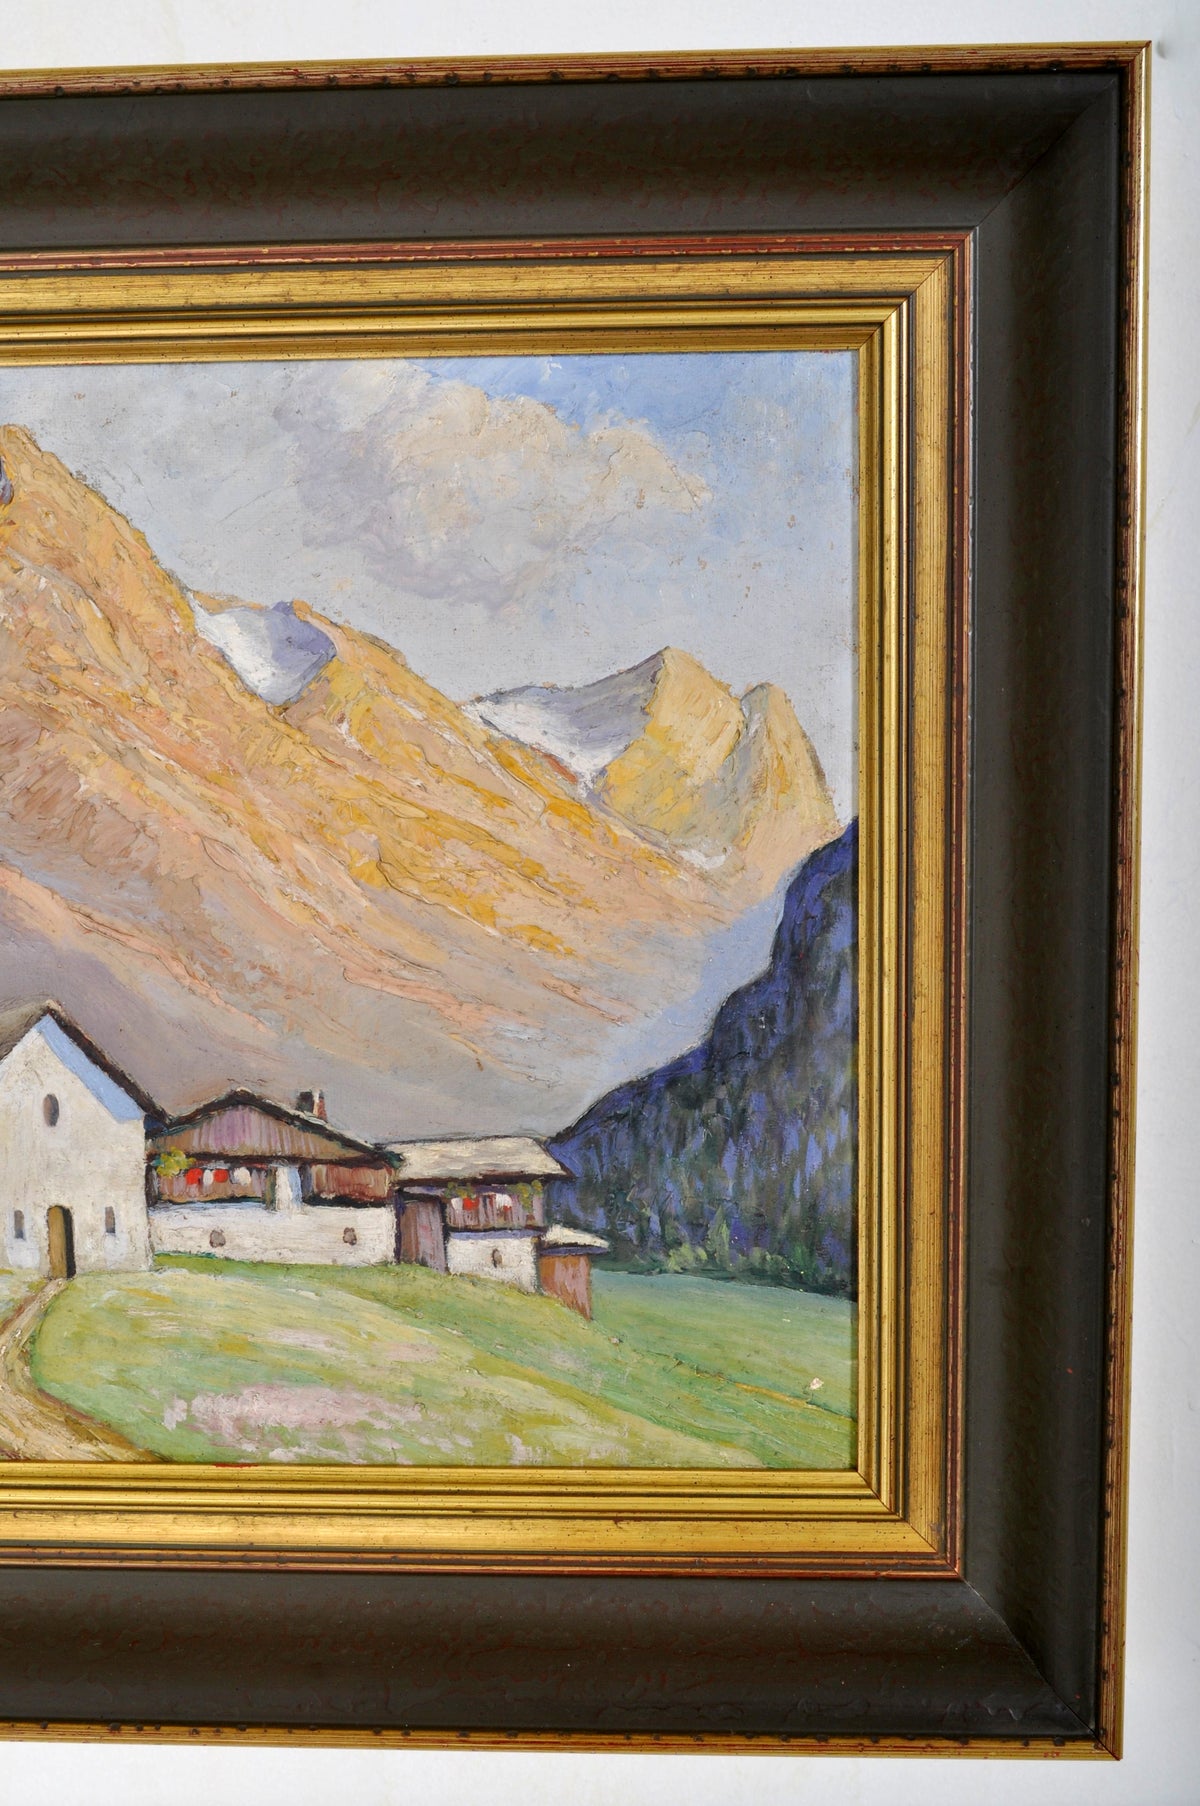 Antique Oil on Board Painting of a Swiss Chalet Mountain Landscape Scene, Circa 1900